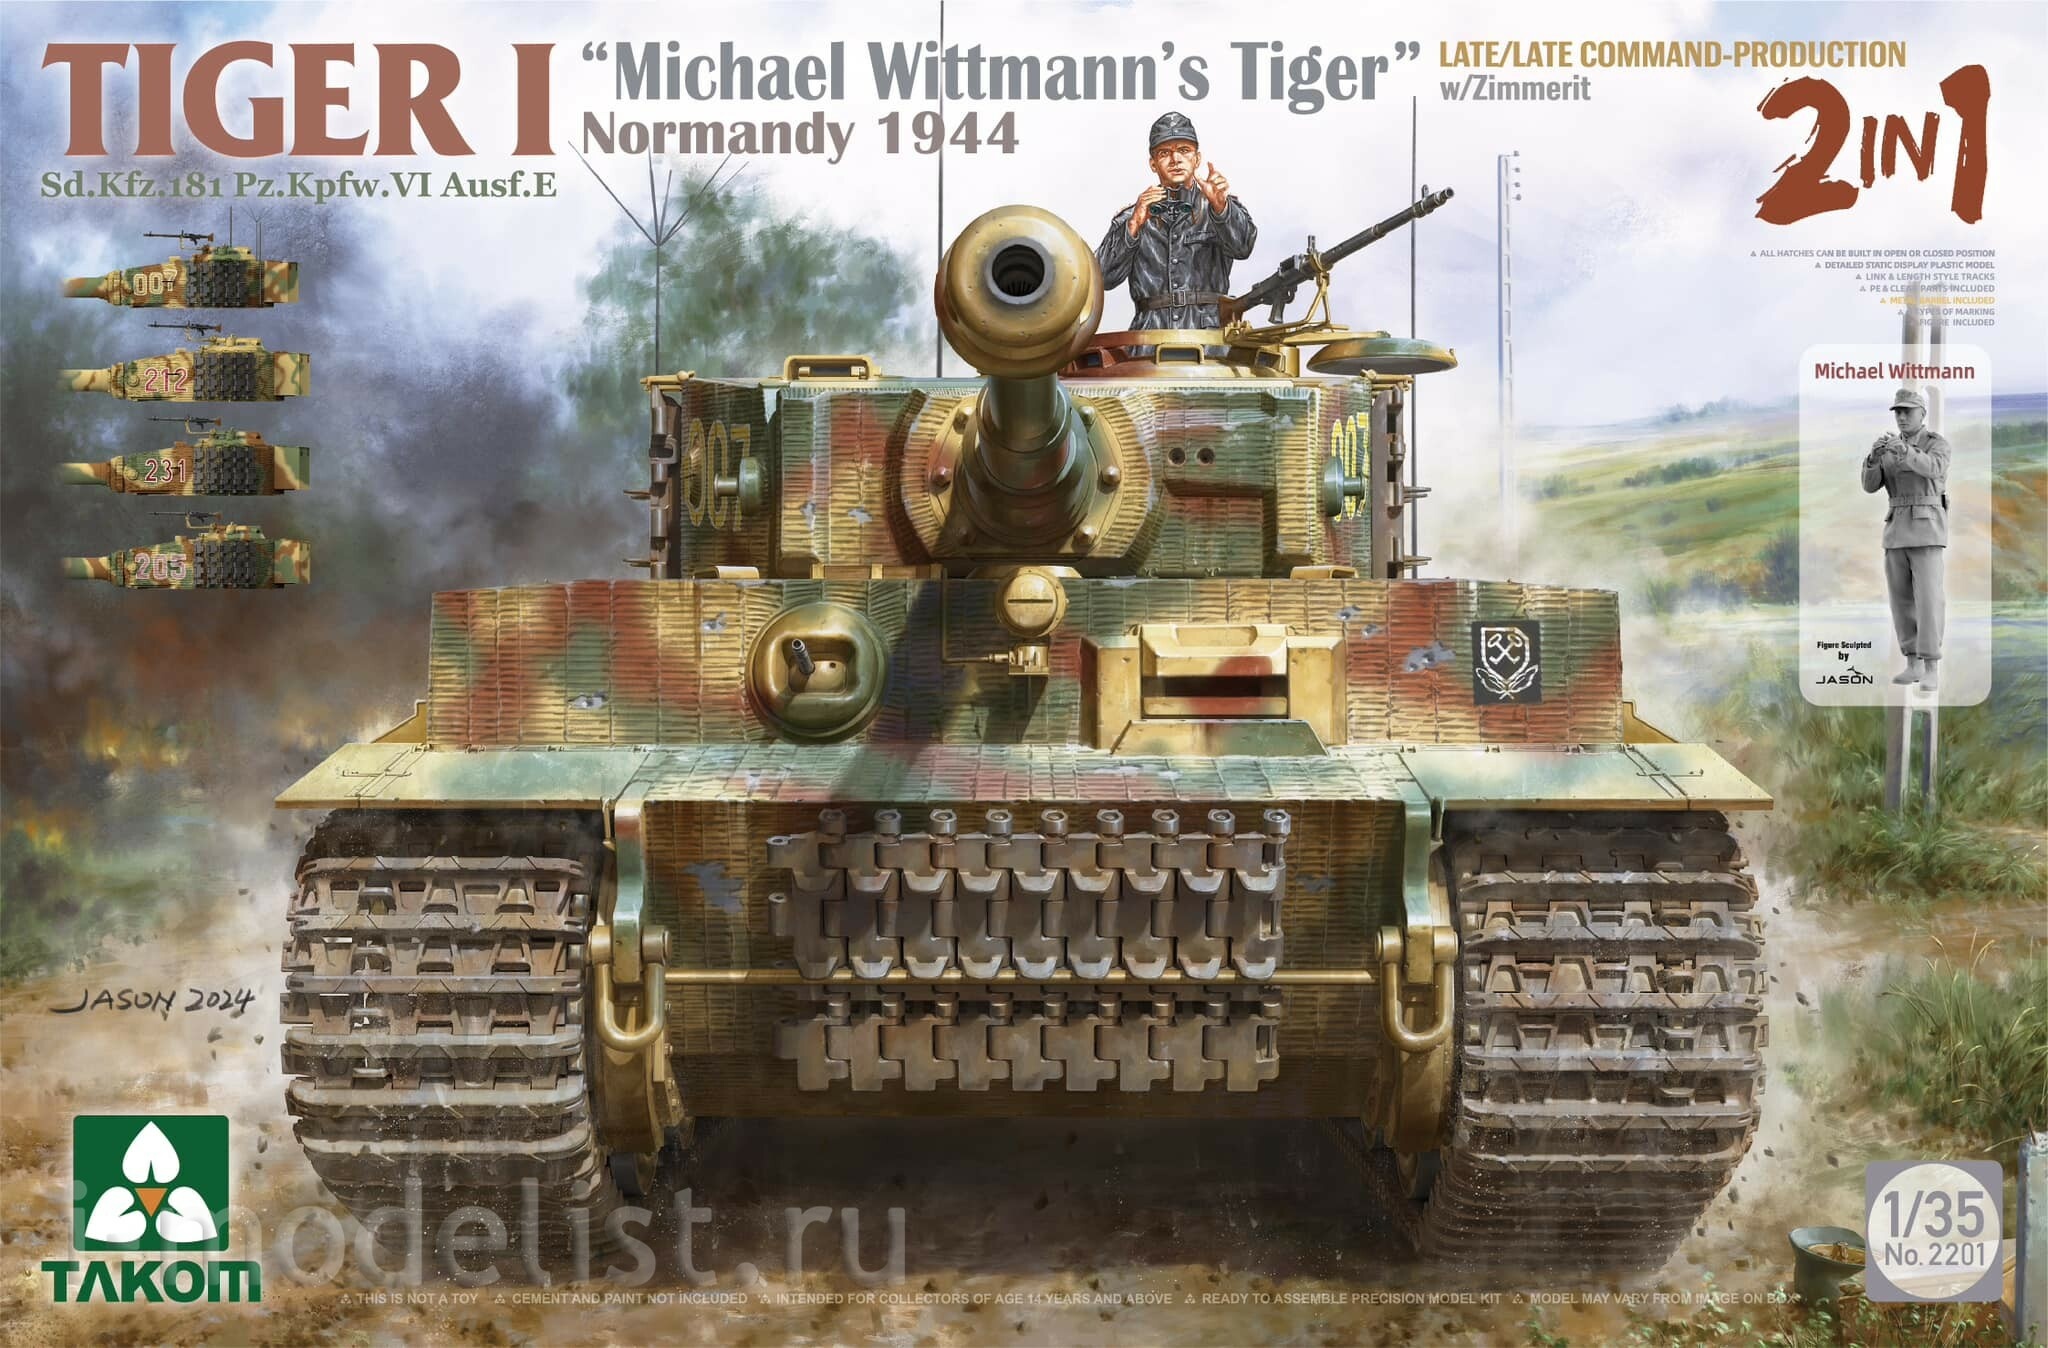 1/35 Tiger I Late Production w/zimmerit Normandy 1944 - Sd.Kfz. 181 Pz.Kpfw. VI Ausf. E "Michael Wittmann's Tiger" (Late/Late Command)